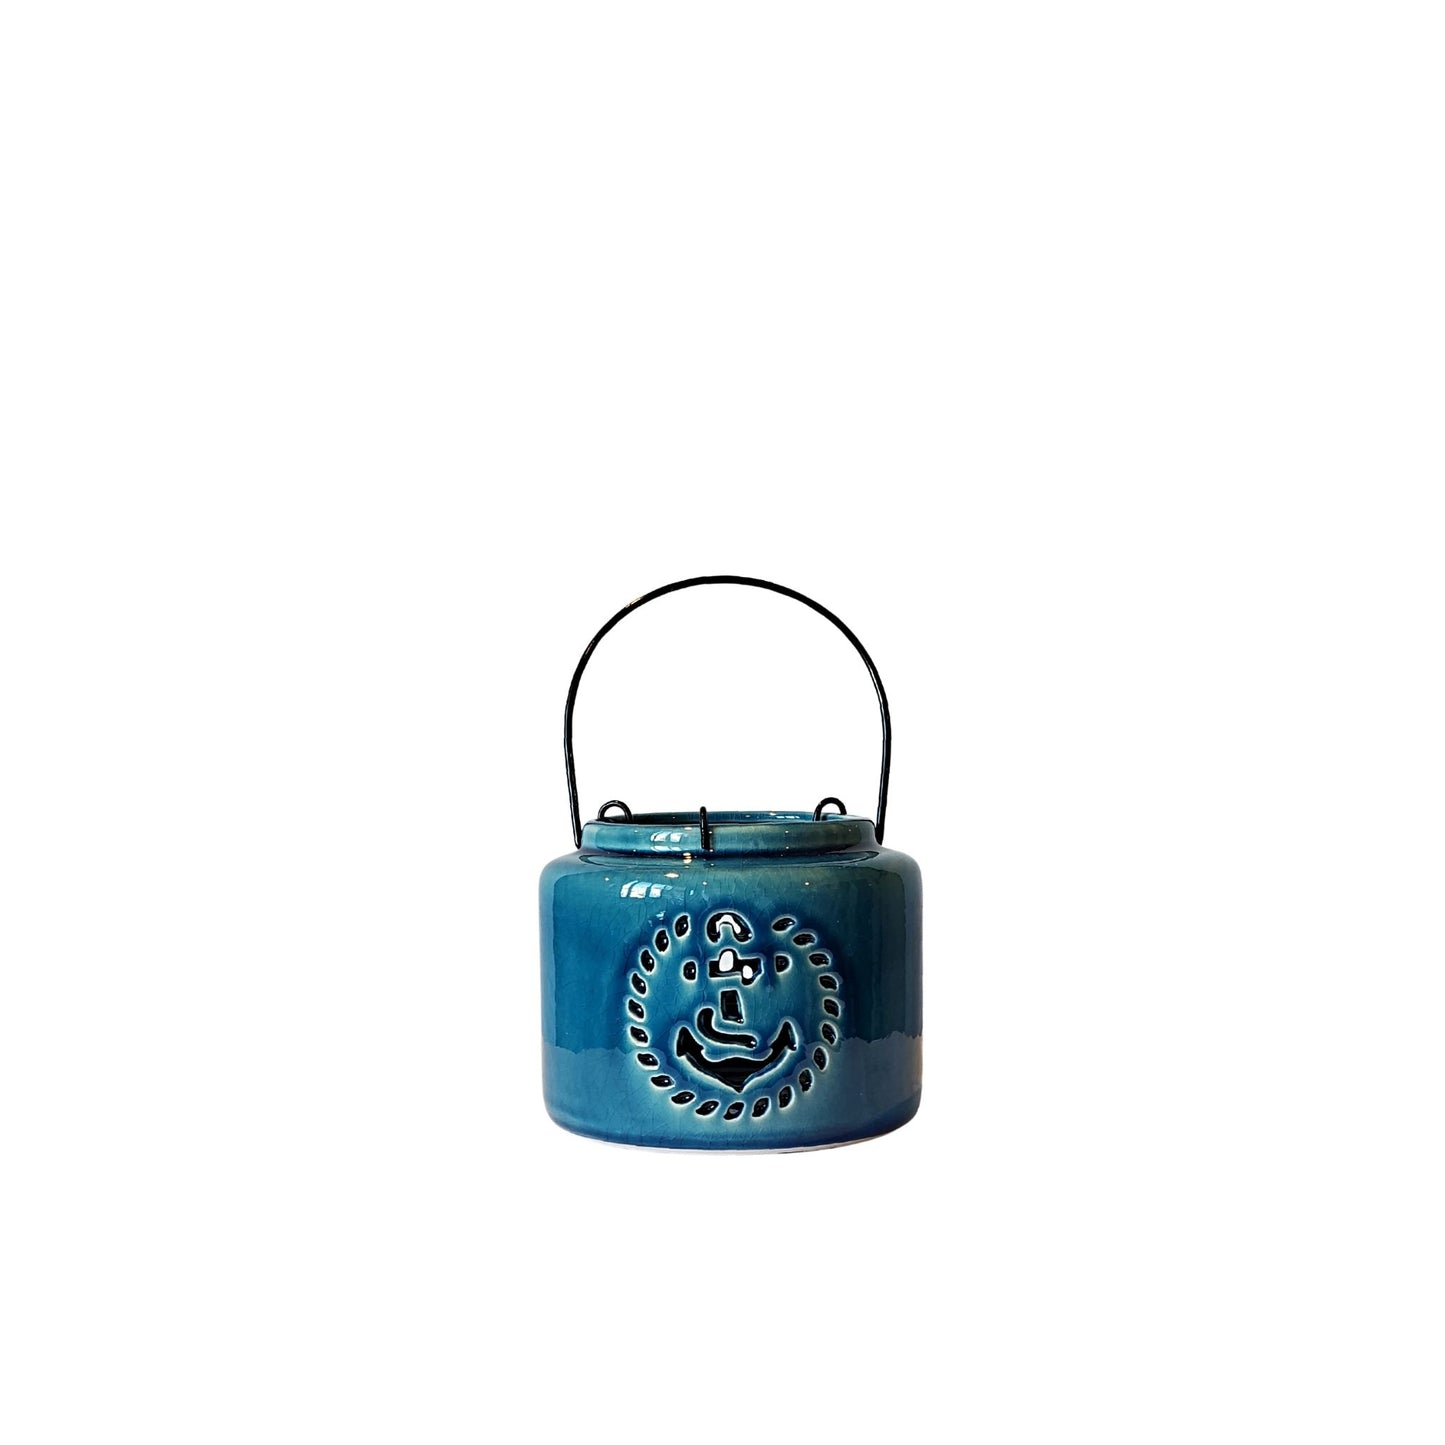 Light Blue Nautical lantern, these lanterns are uniquely designed with nautical shaped cut outs that allow light from the candles to shine through.  Each lantern has a wire insert that holds the candle in the middle of the lantern and metal handle for hanging